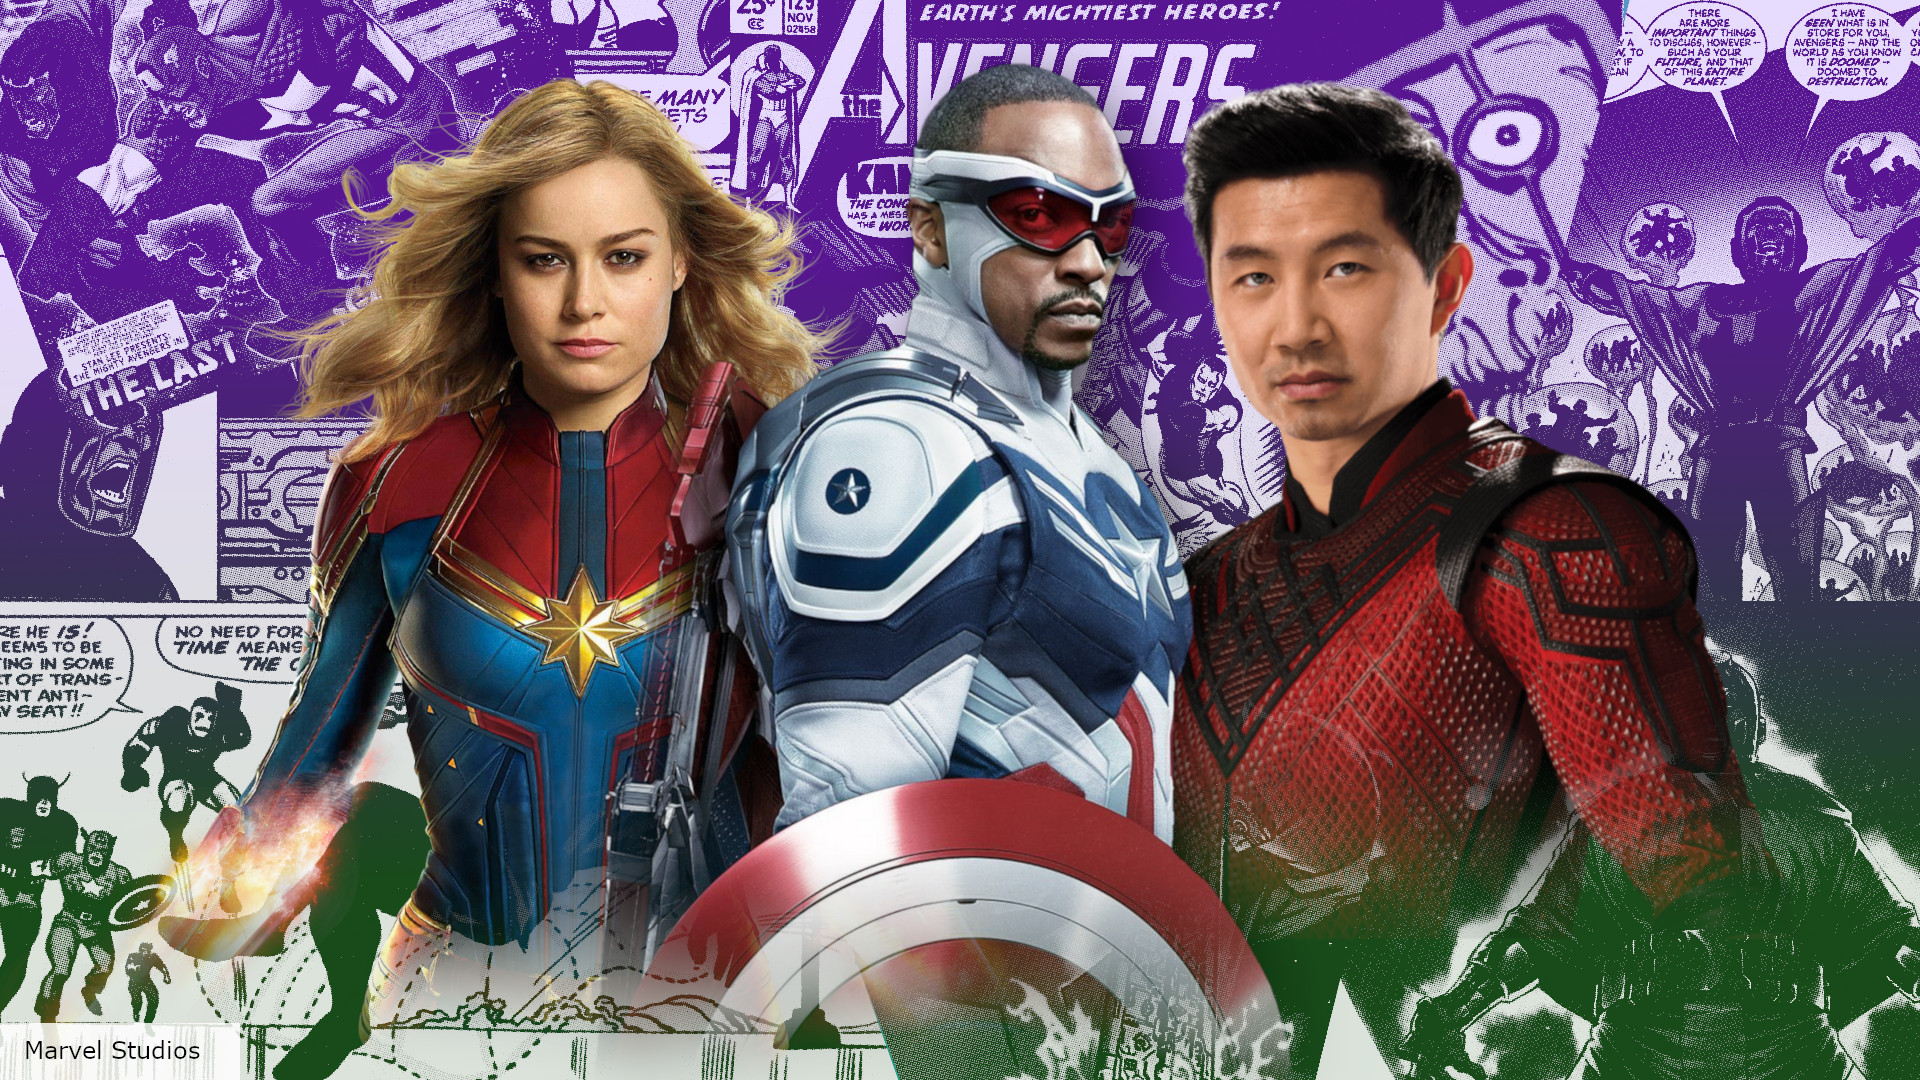 Avengers 5 Poster Assembles The New Generation Of The Team To Fight Kang In  MCU Art